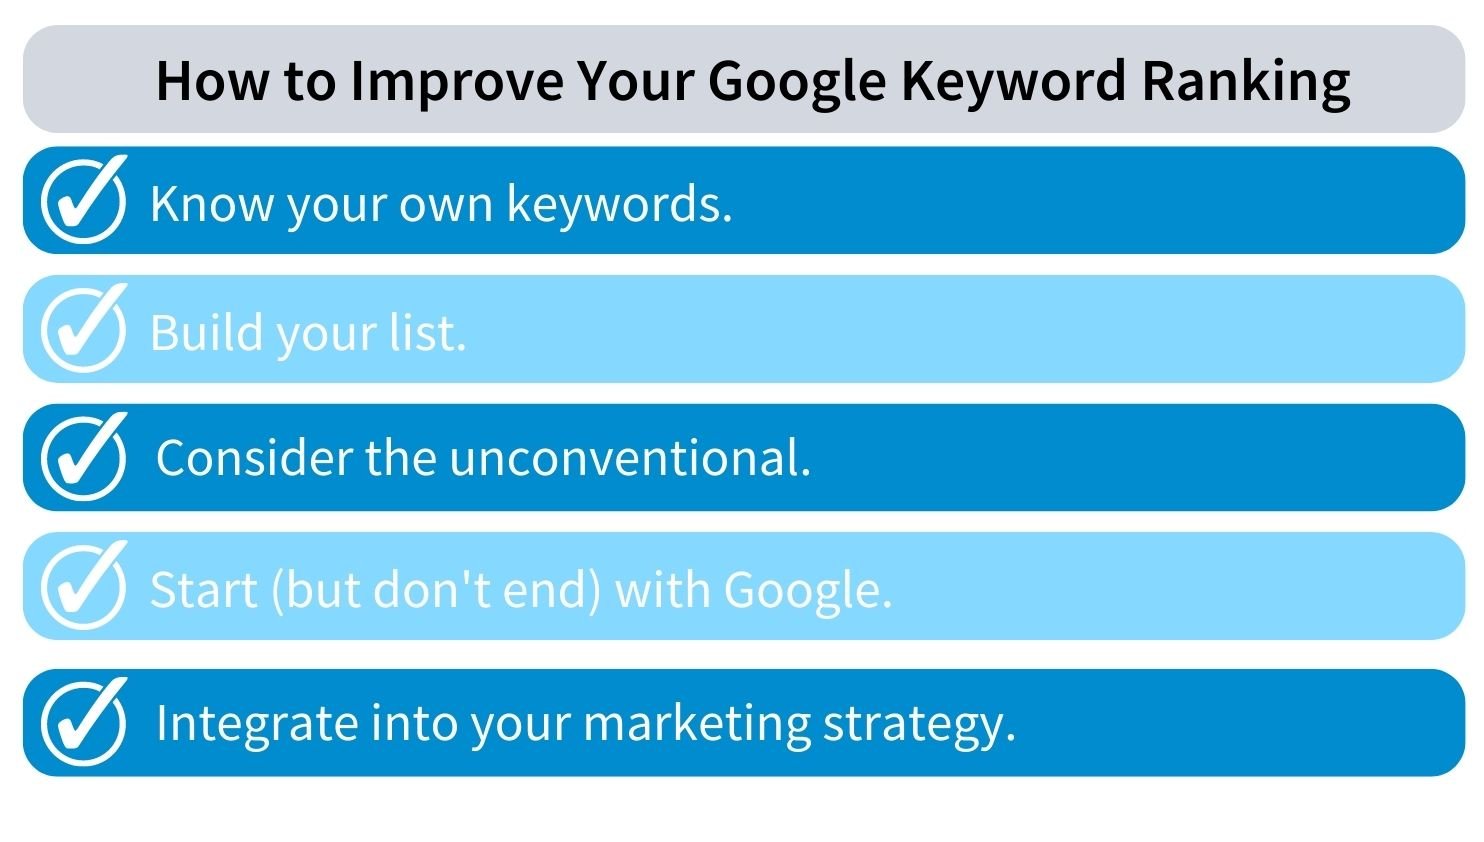 How to improve your Google keyword ranking